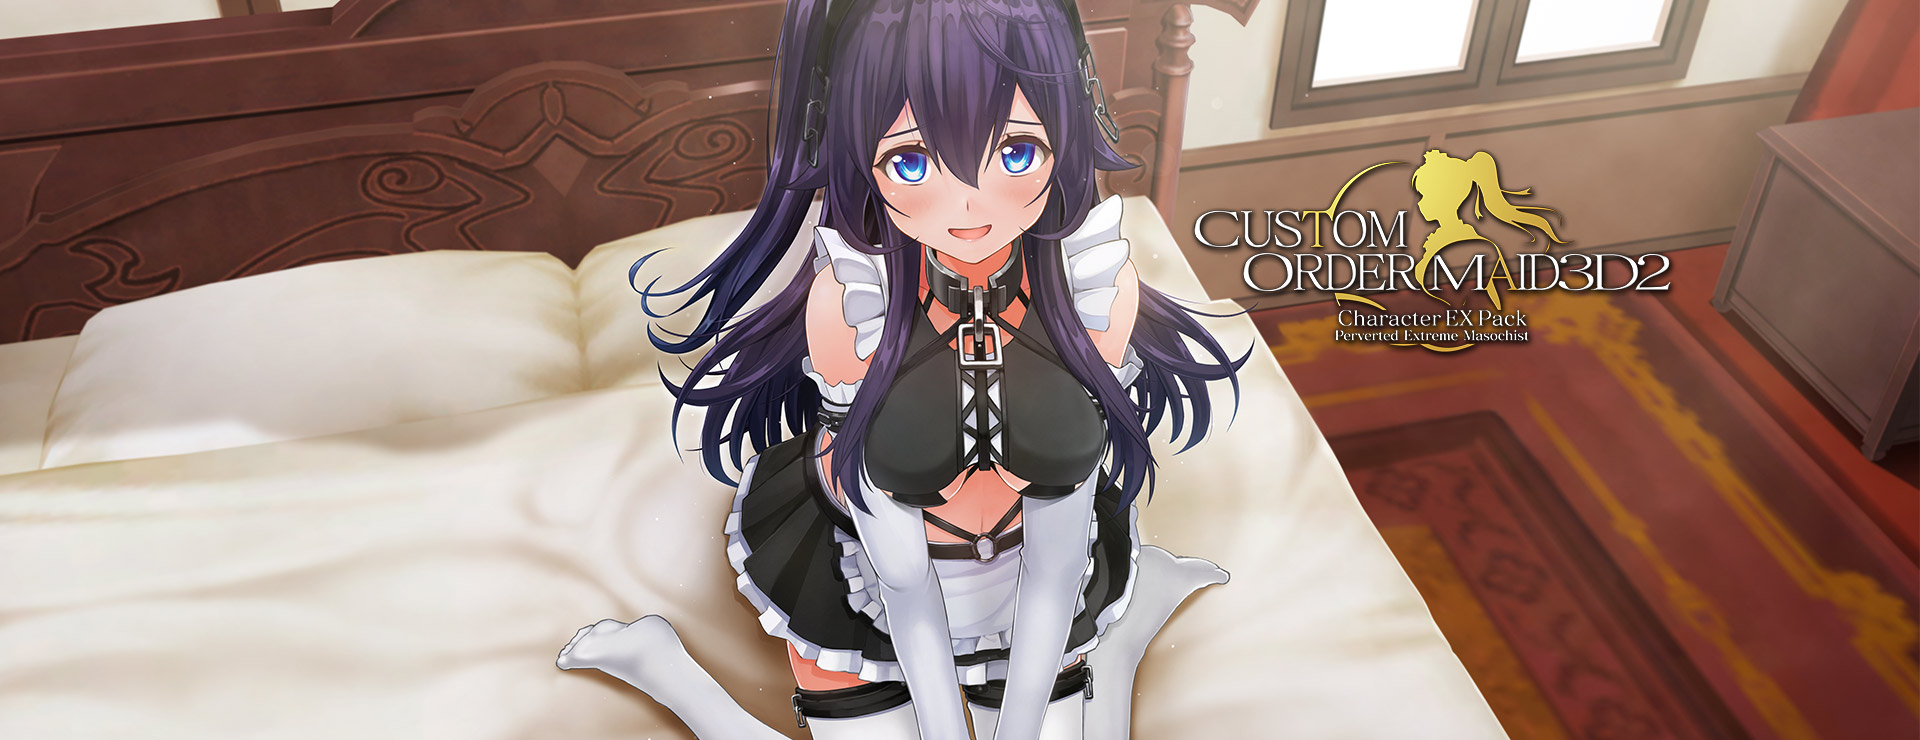 Custom Order Maid 3D 2: Character EX Pack Perverted Extreme Masochist - 仿真游戏 遊戲